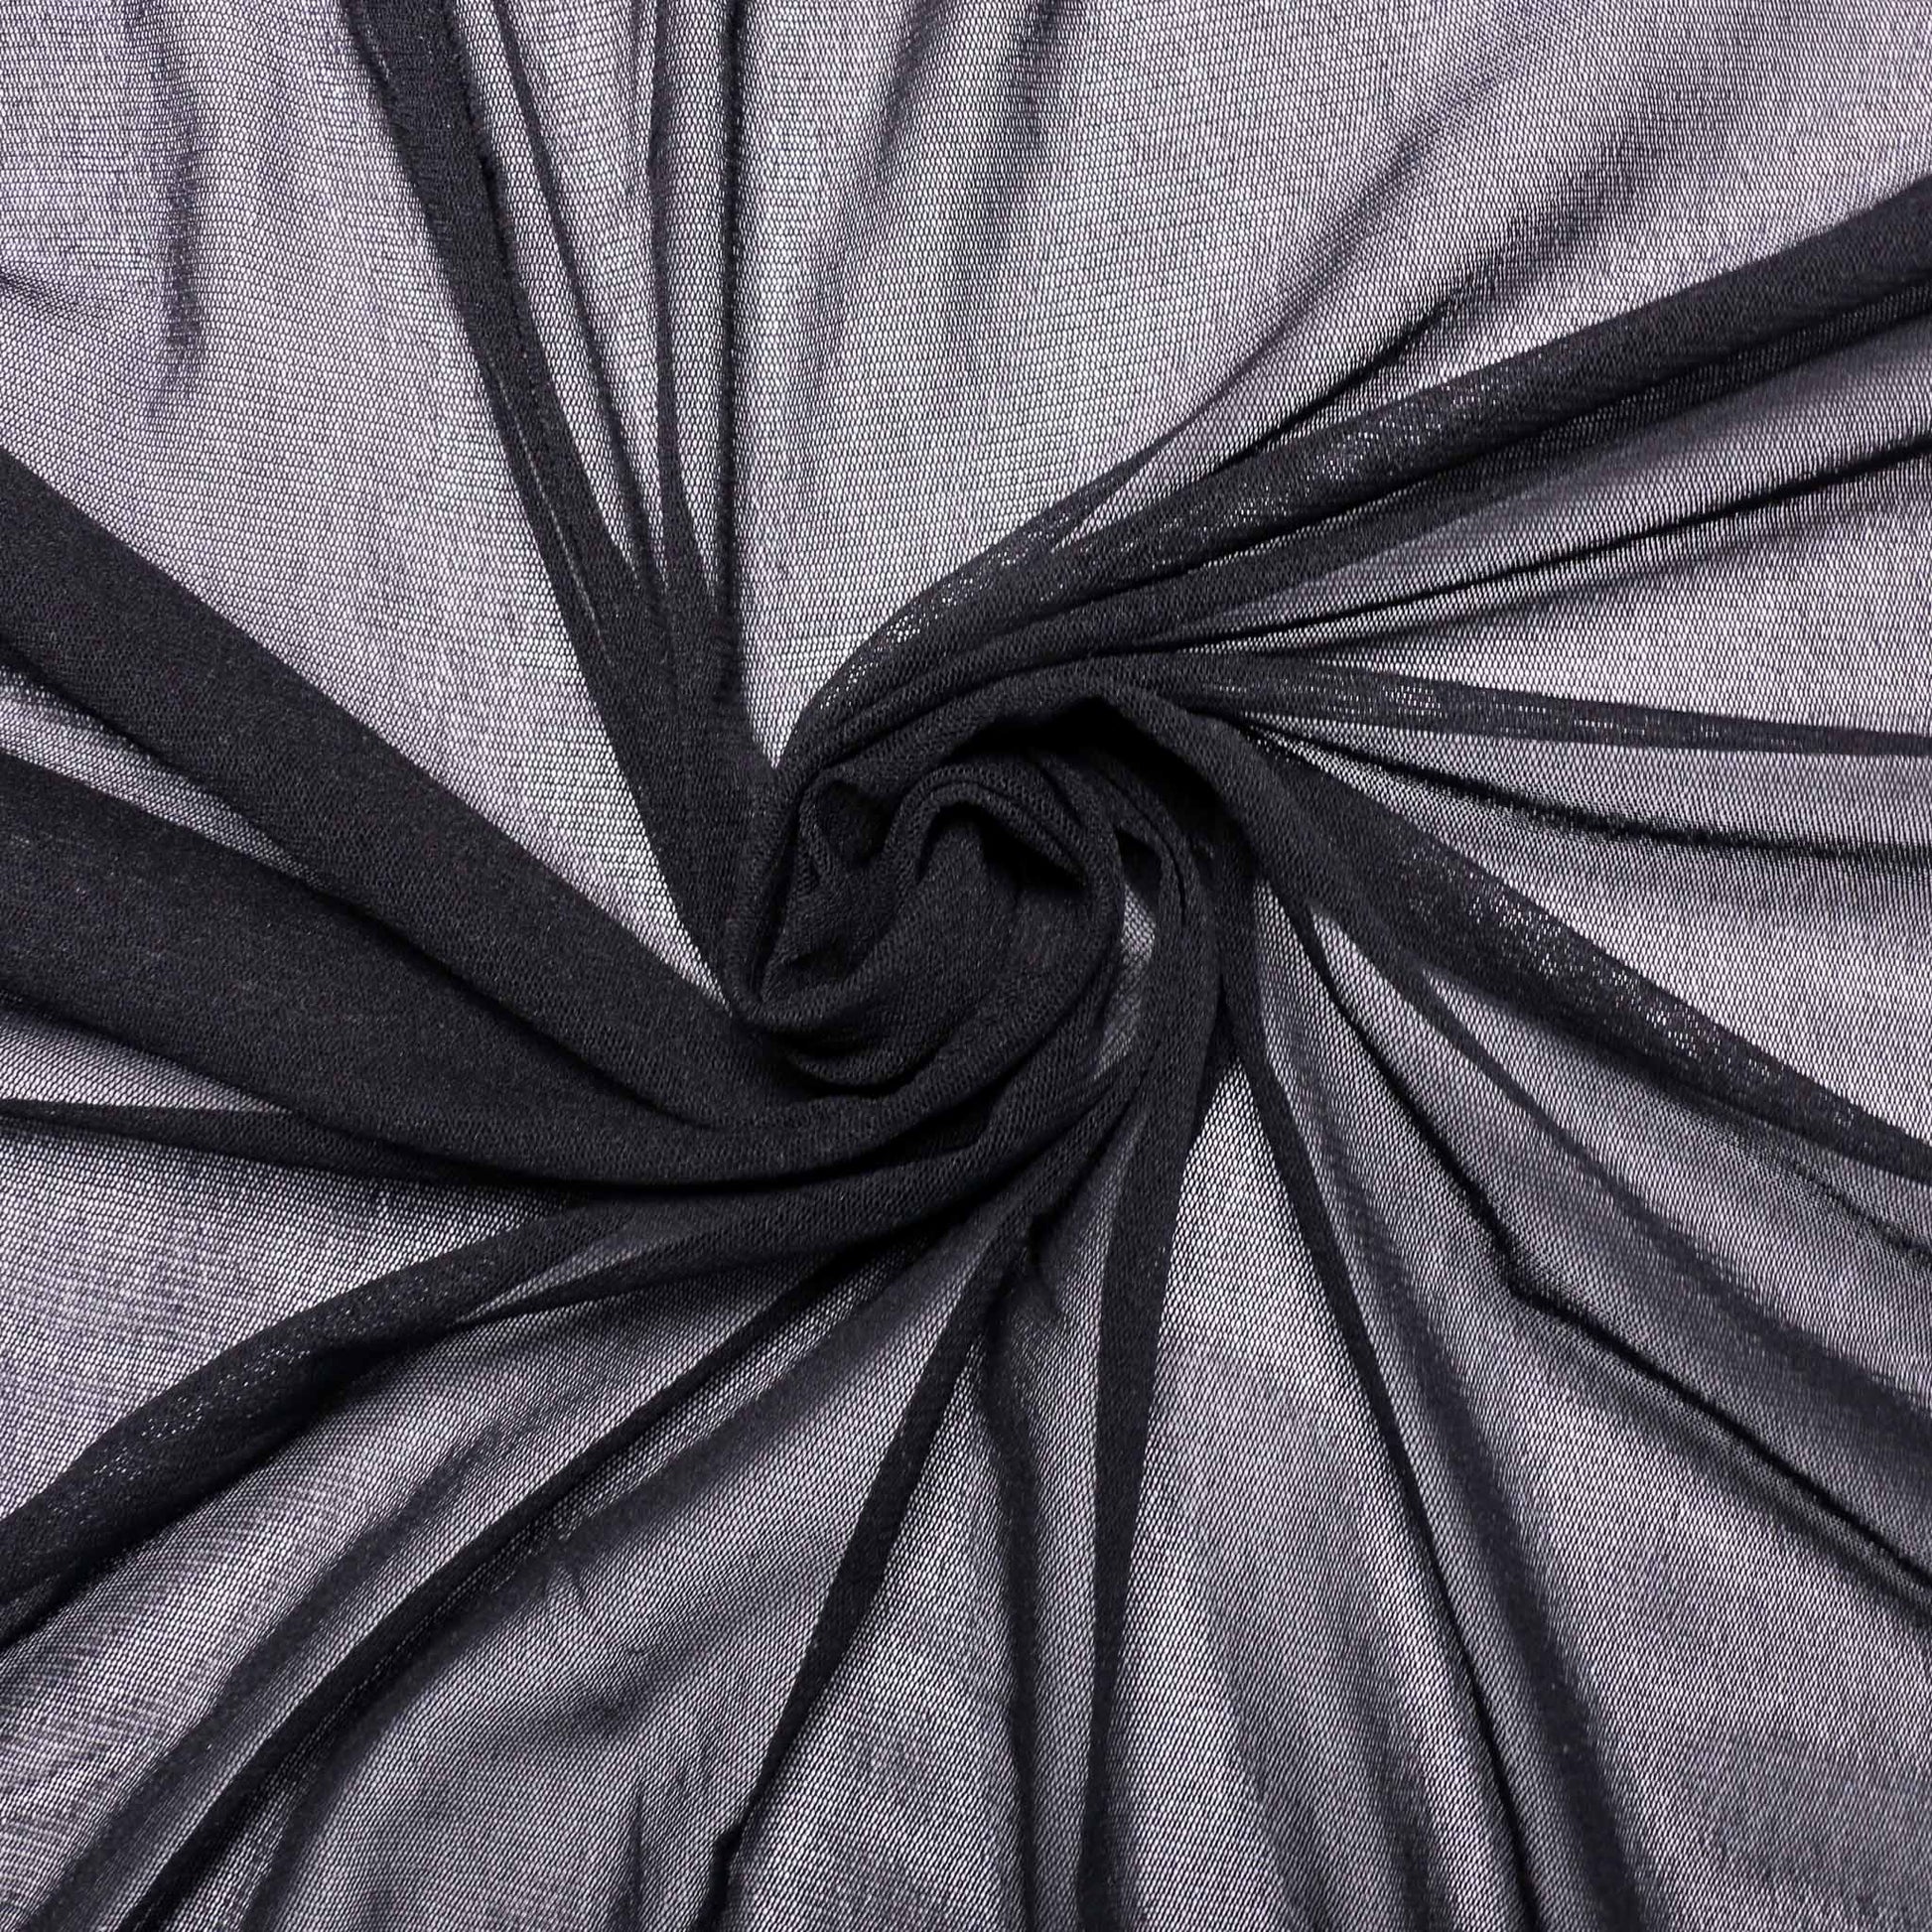 netting fabric for dressmaking in black colour